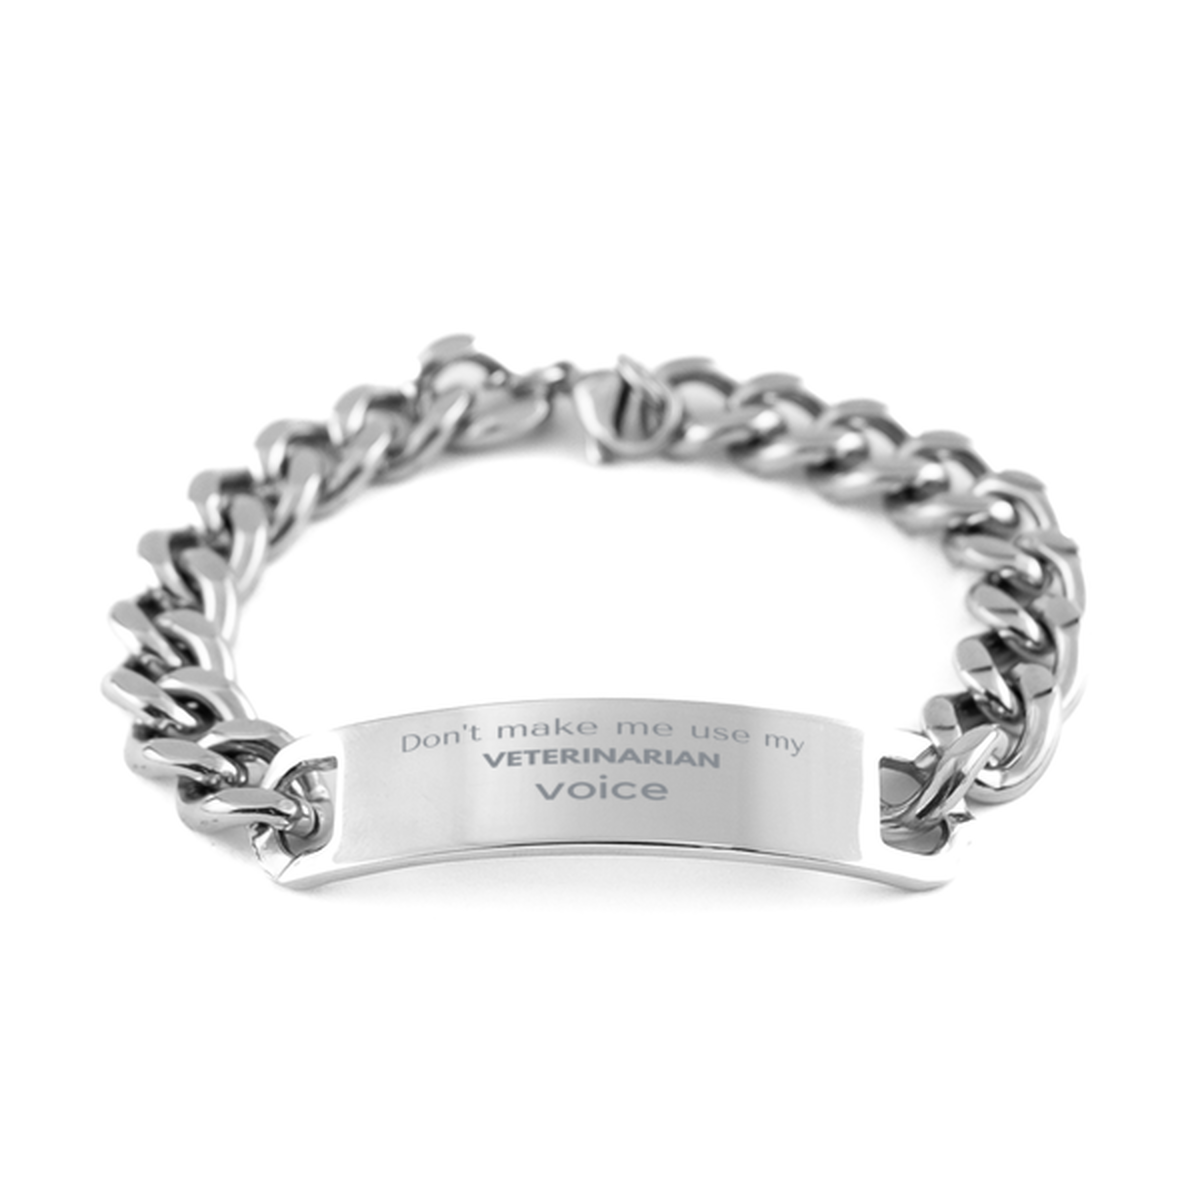 Don't make me use my Veterinarian voice, Sarcasm Veterinarian Gifts, Christmas Veterinarian Cuban Chain Stainless Steel Bracelet Birthday Unique Gifts For Veterinarian Coworkers, Men, Women, Colleague, Friends